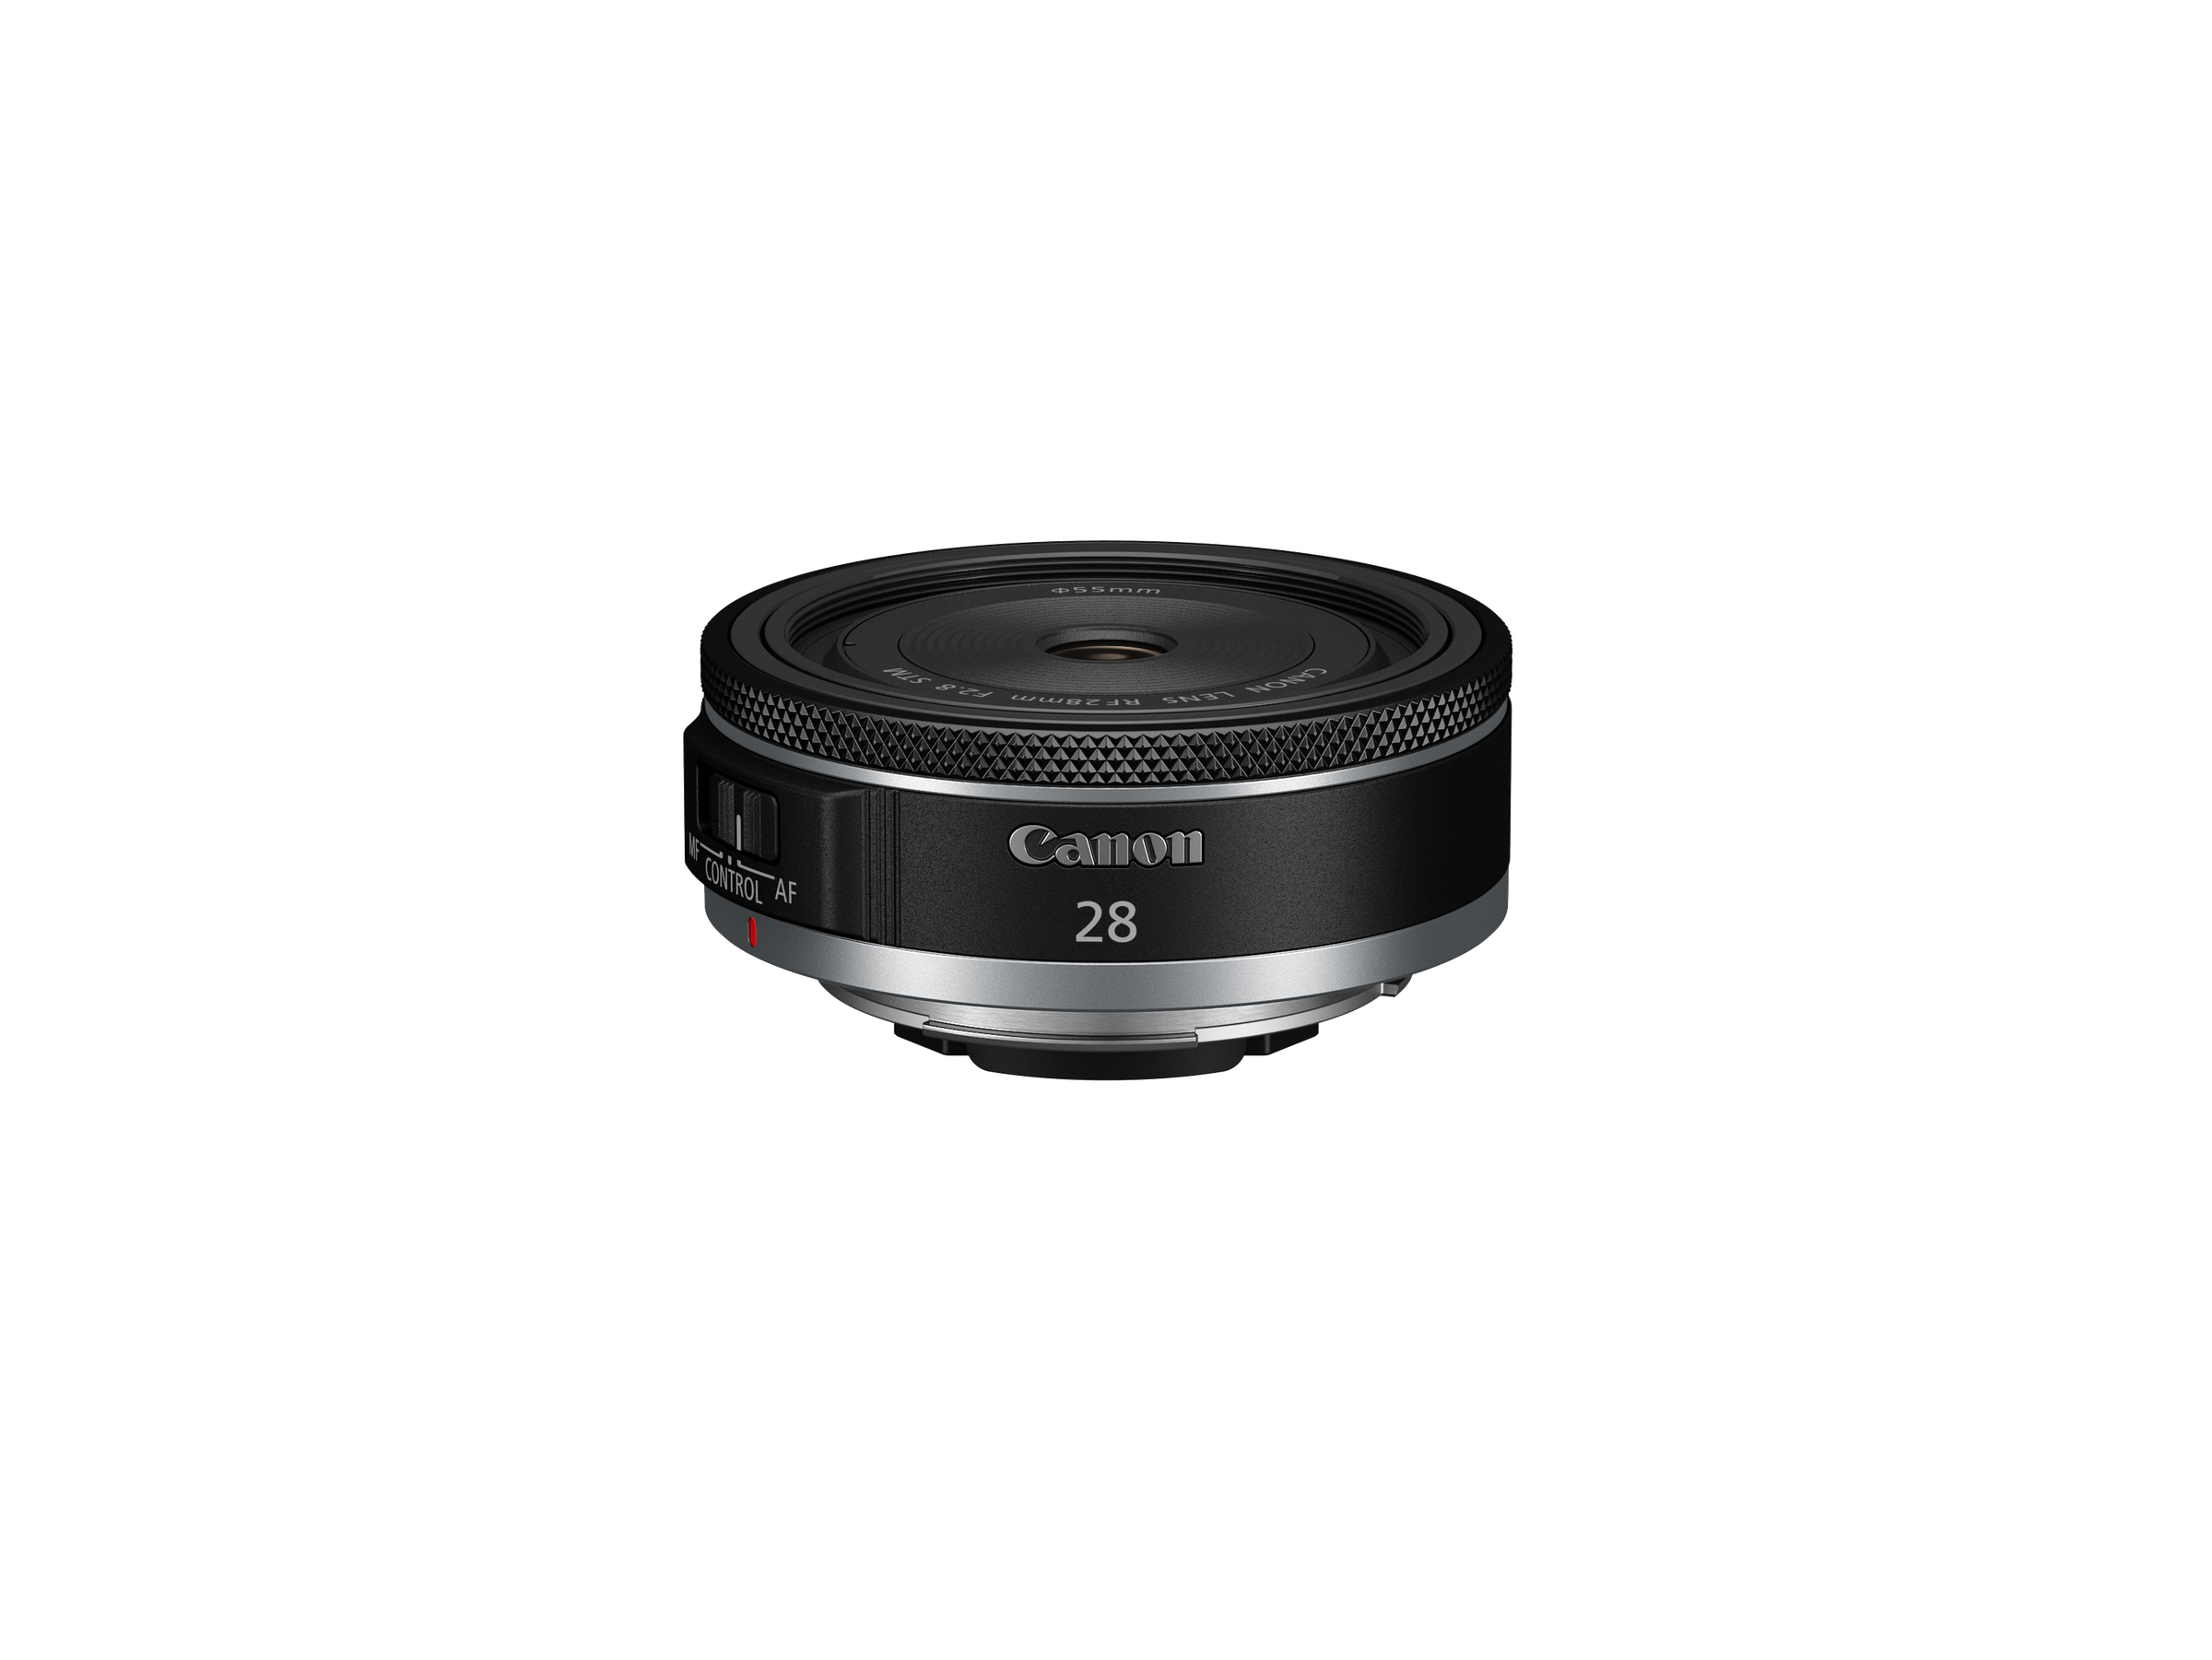 The new 28mm pancake seems like a nice budget walkaround lens, even for full-frame Canon owners.